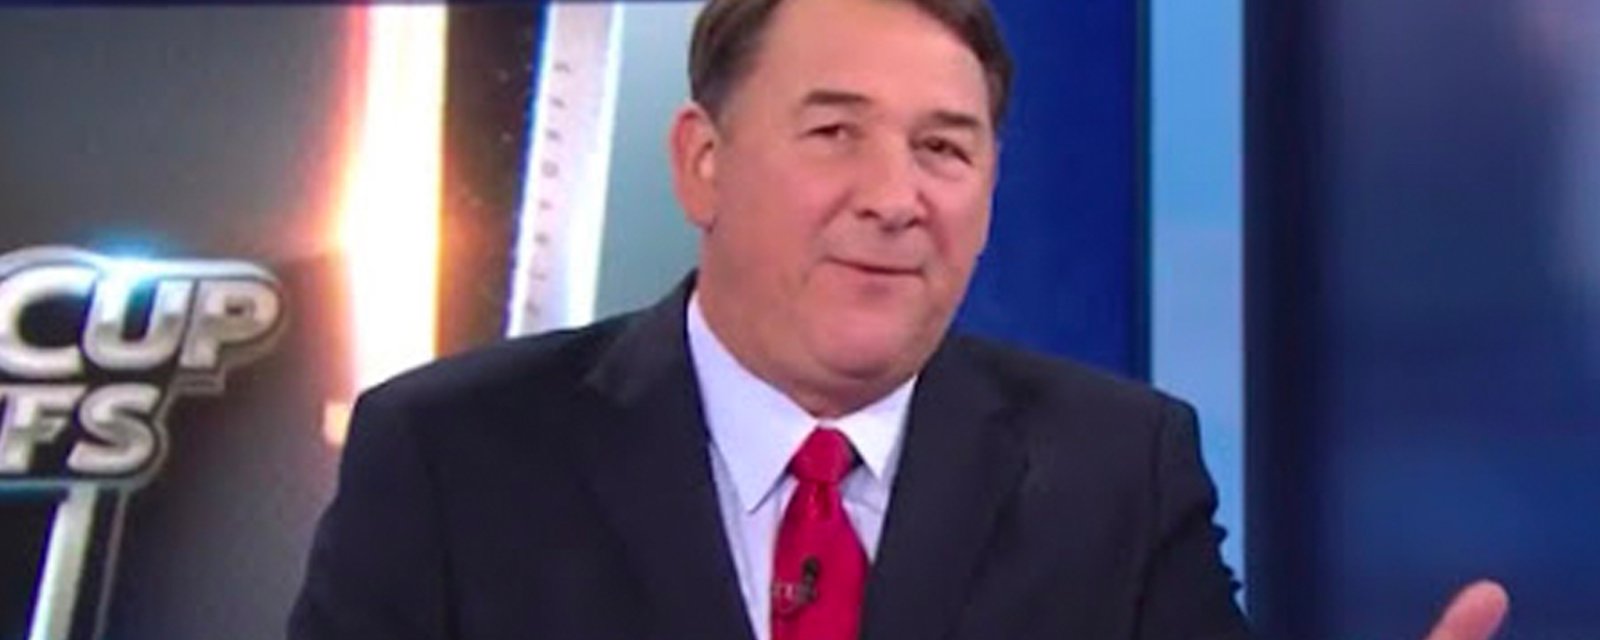 Fans lash out after Milbury's misogynistic comments tonight